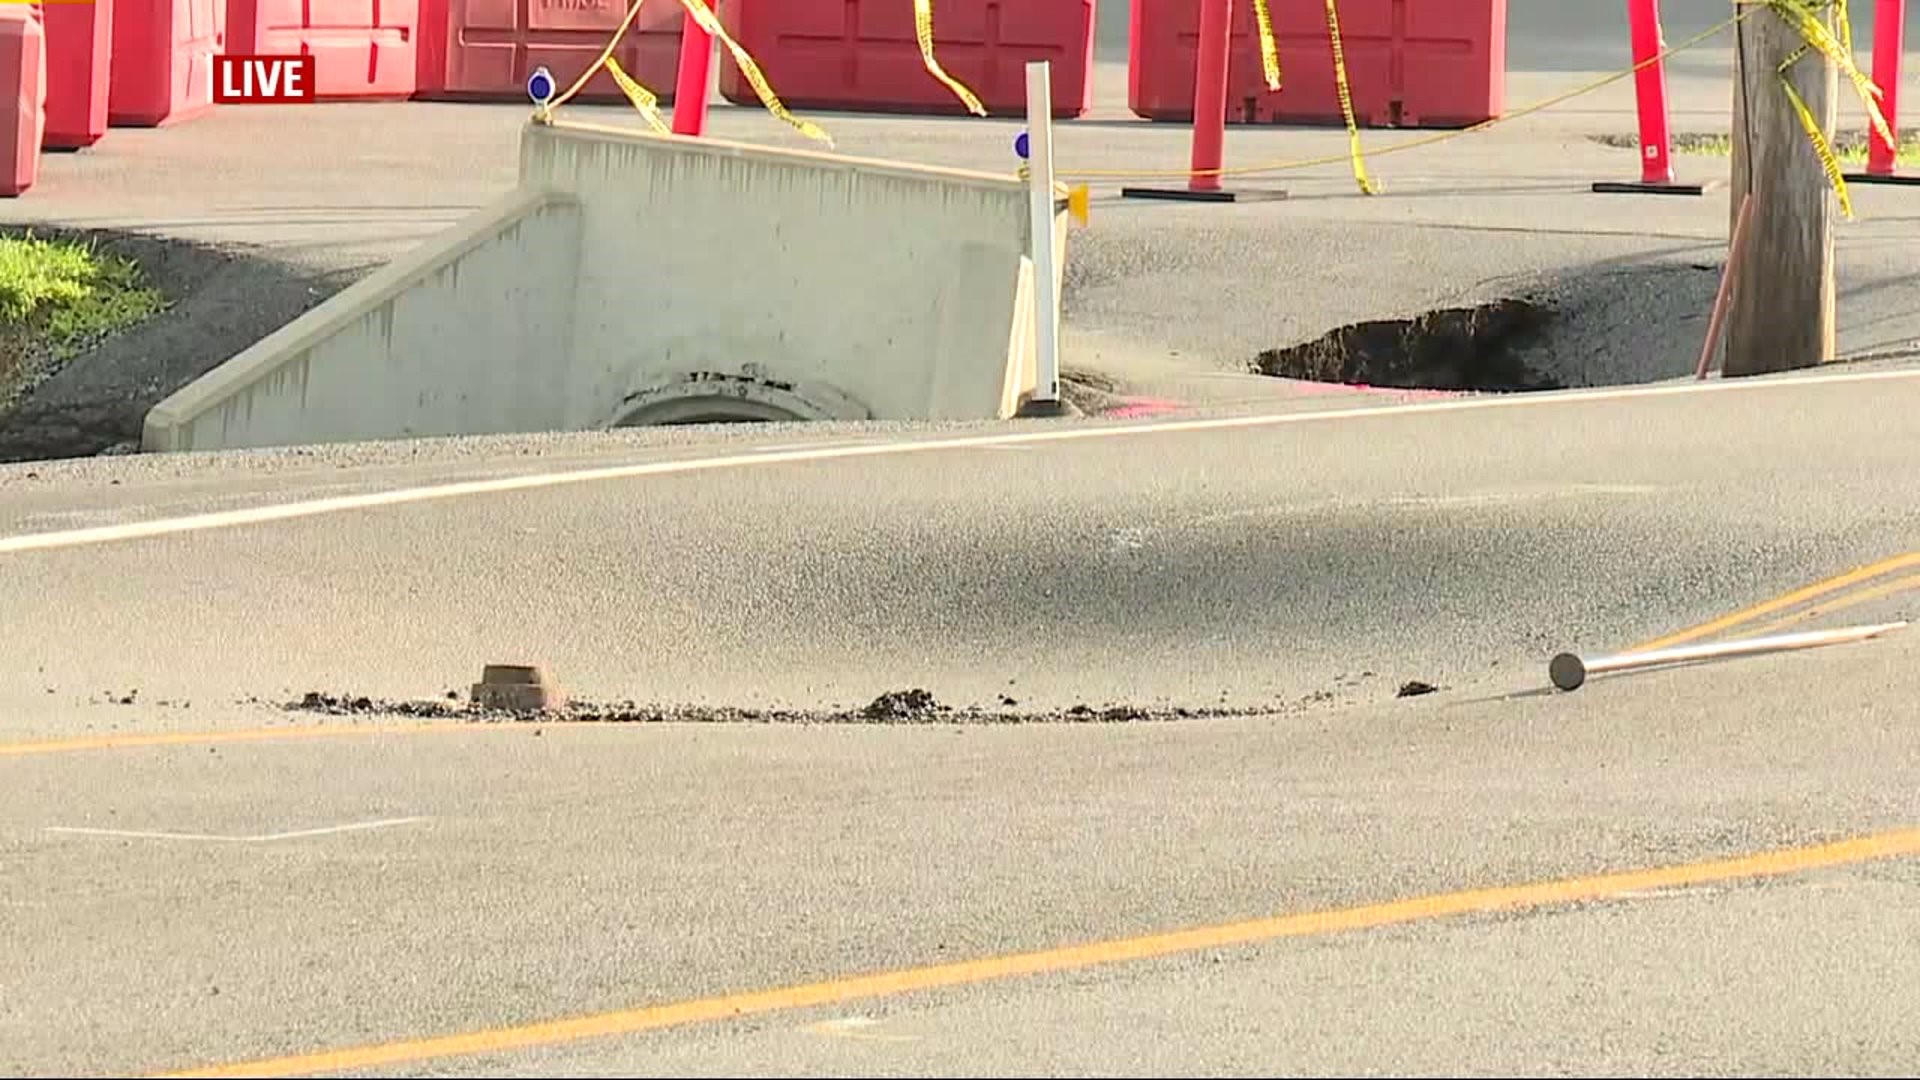 All Lanes of Rt. 442 Closed for Sinkhole